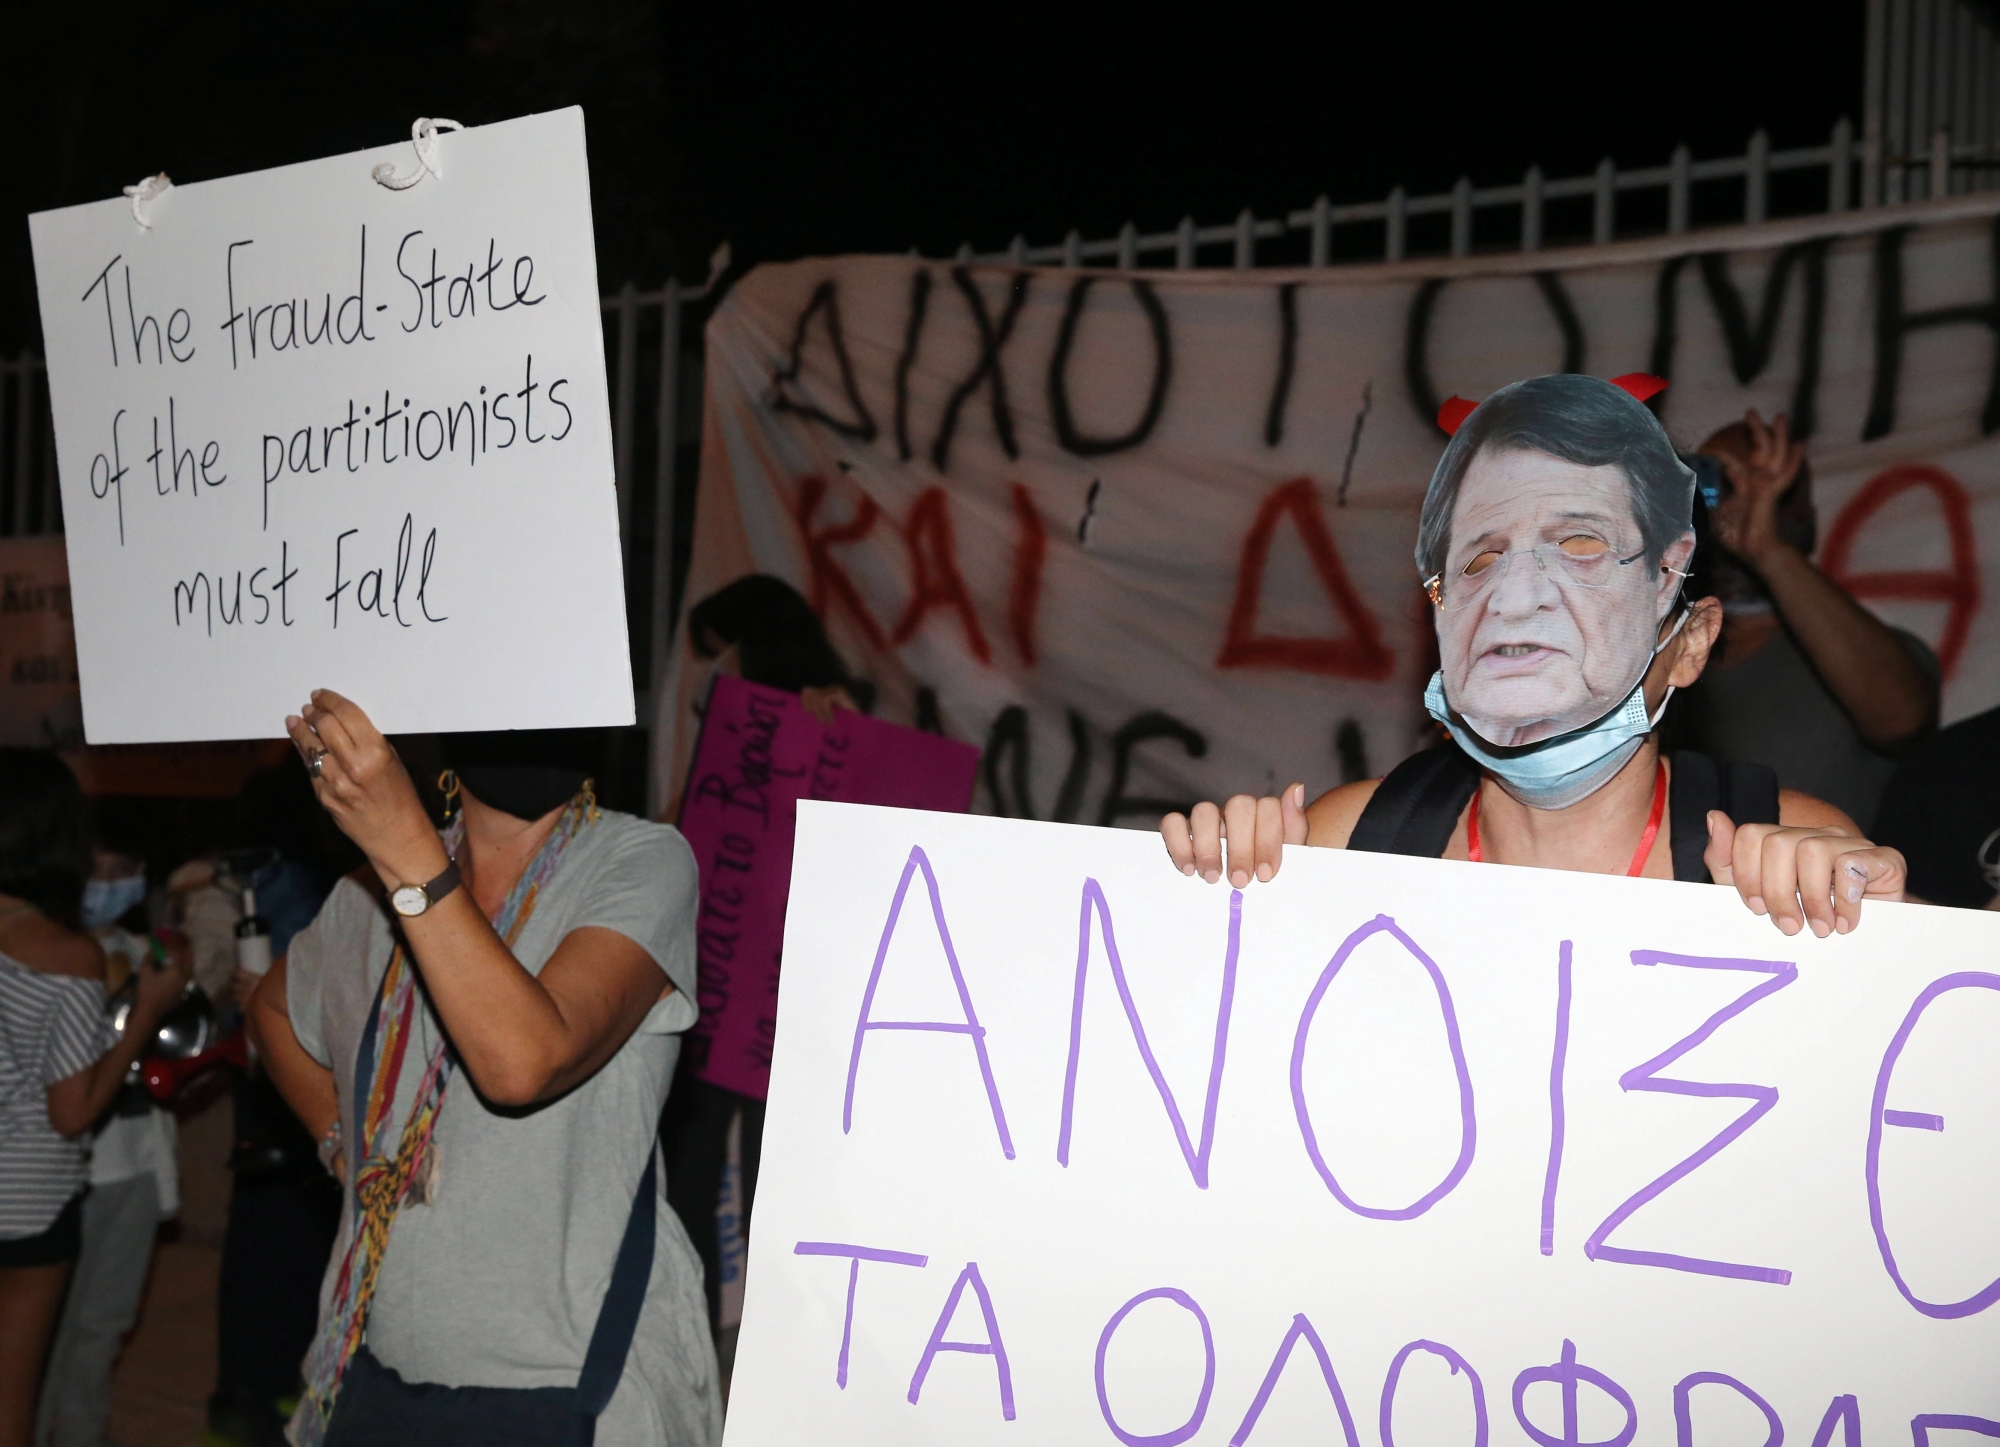 epa08745529 A person wearing a mask depicting Cyprus President Nicos Anastasiades, attends a protest against corruption in Nicosia, Cyprus, 14 October 2020. Hundreds of people gathered outside the Filoxenia Conference Center, currently hosting the Parliament, to protest and demand the resignation of the President of the Parliament, Demetris Syllouris who appeared in an undercover video of Al Jazeera offering to help a foreign businessman with a criminal record to acquire a Cyprus passport.  EPA/KATIA CHRISTODOULOU ArcInfo